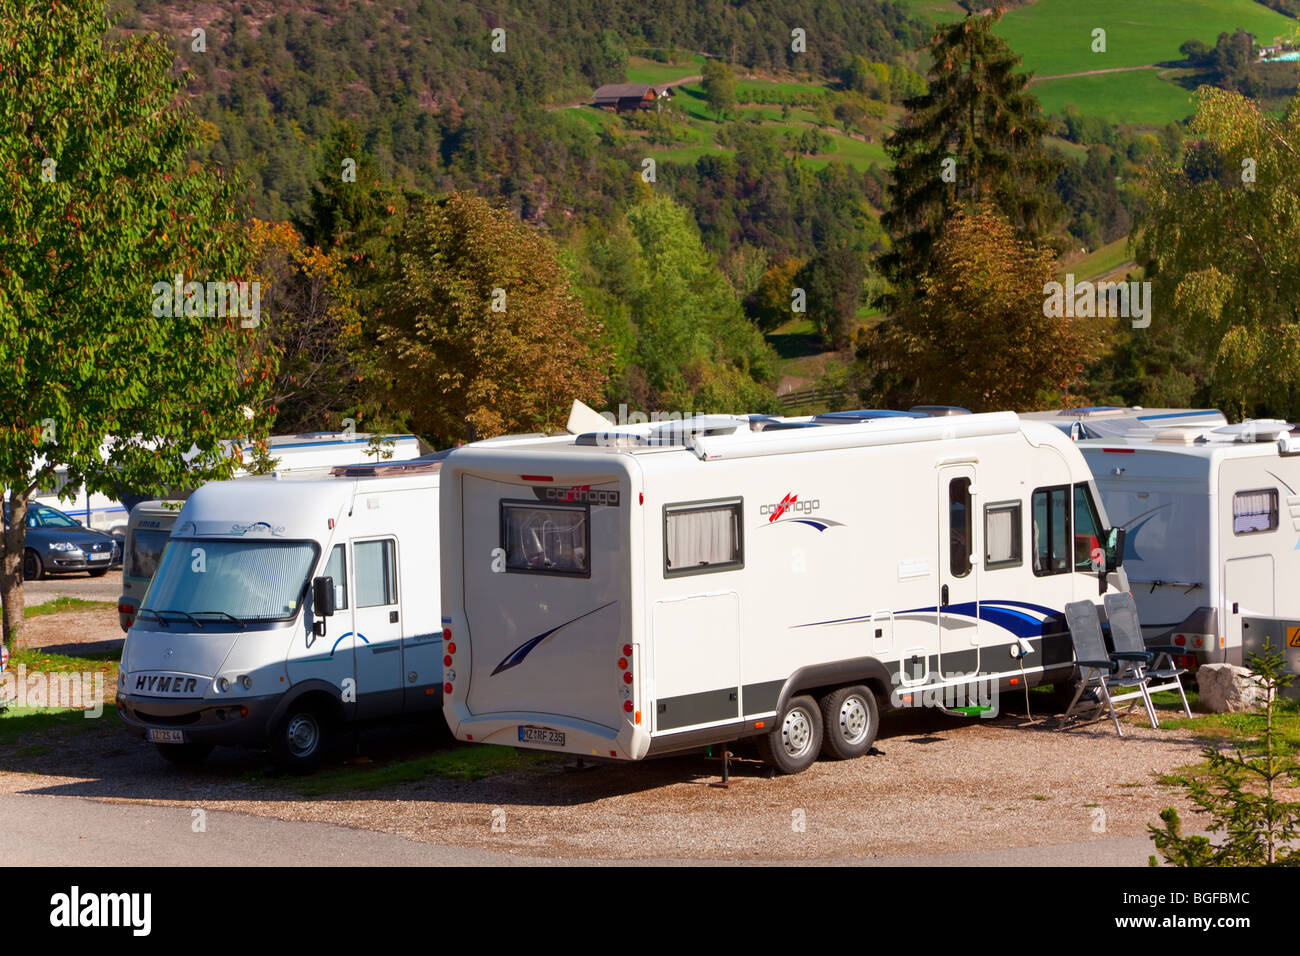 Hymer Camper van at Camping in Northern Italy Stock Photo